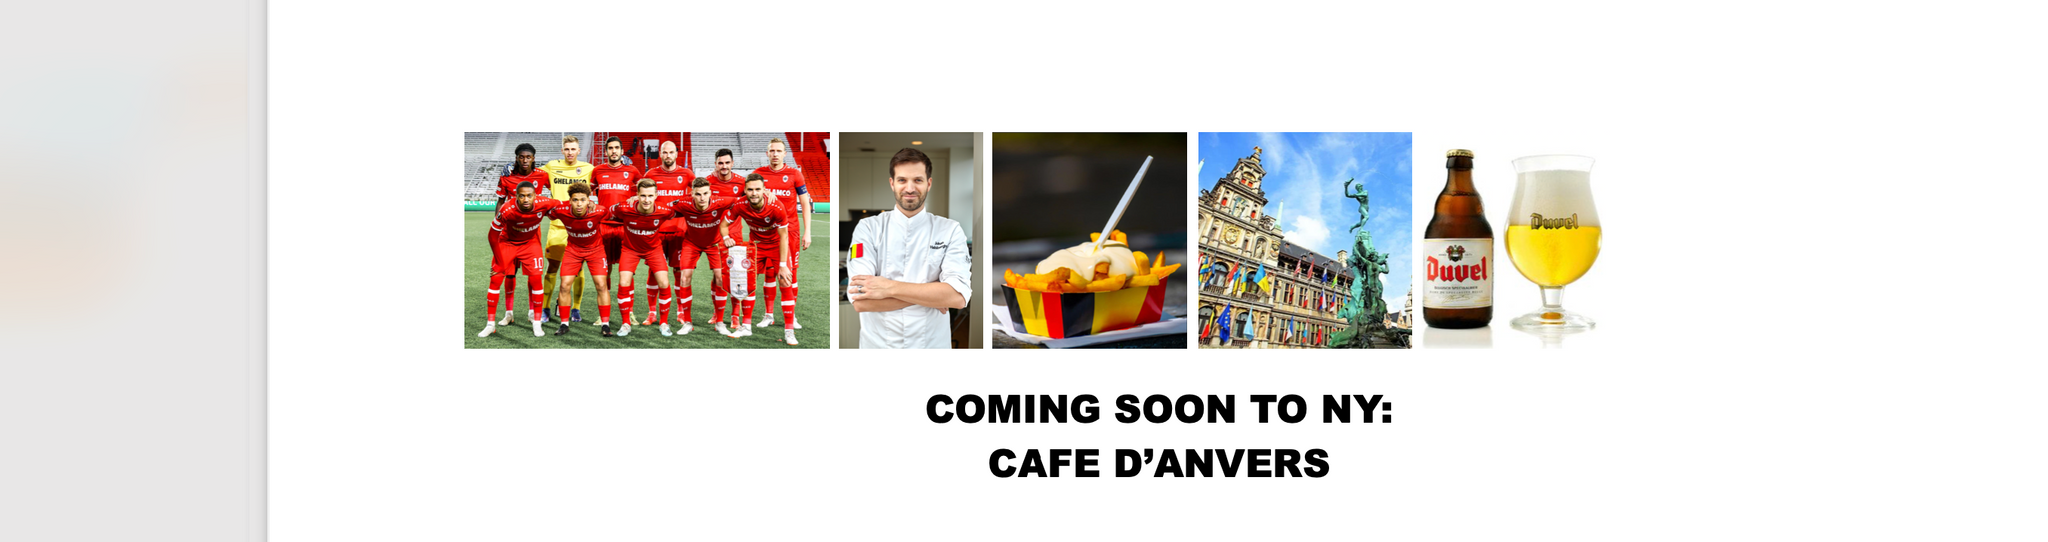 coming soon to ny cafe d anvers